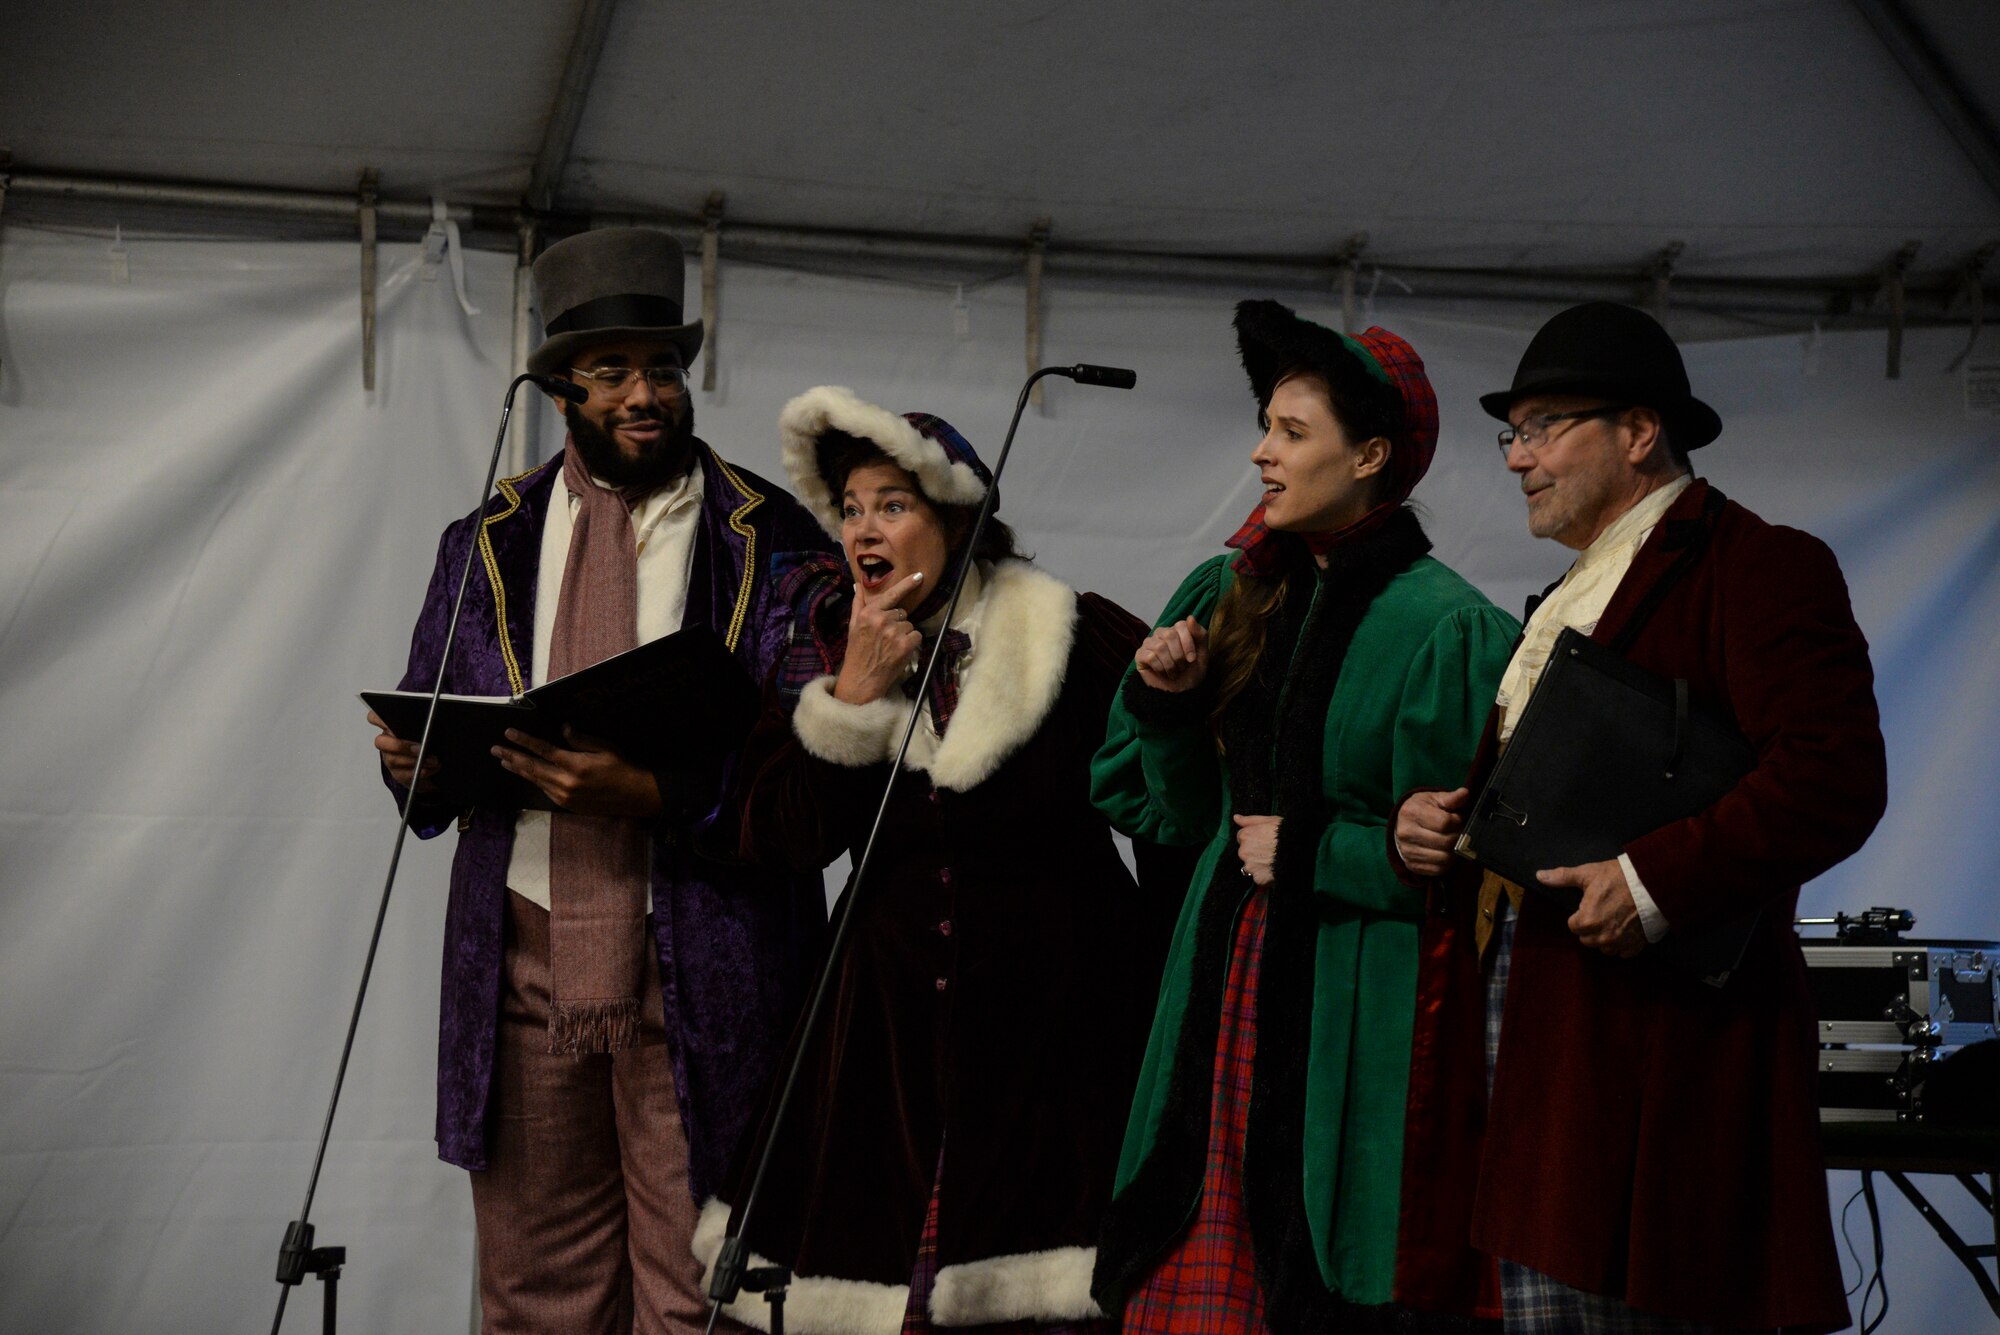 a photo of Singers providing live music during a base holiday event.